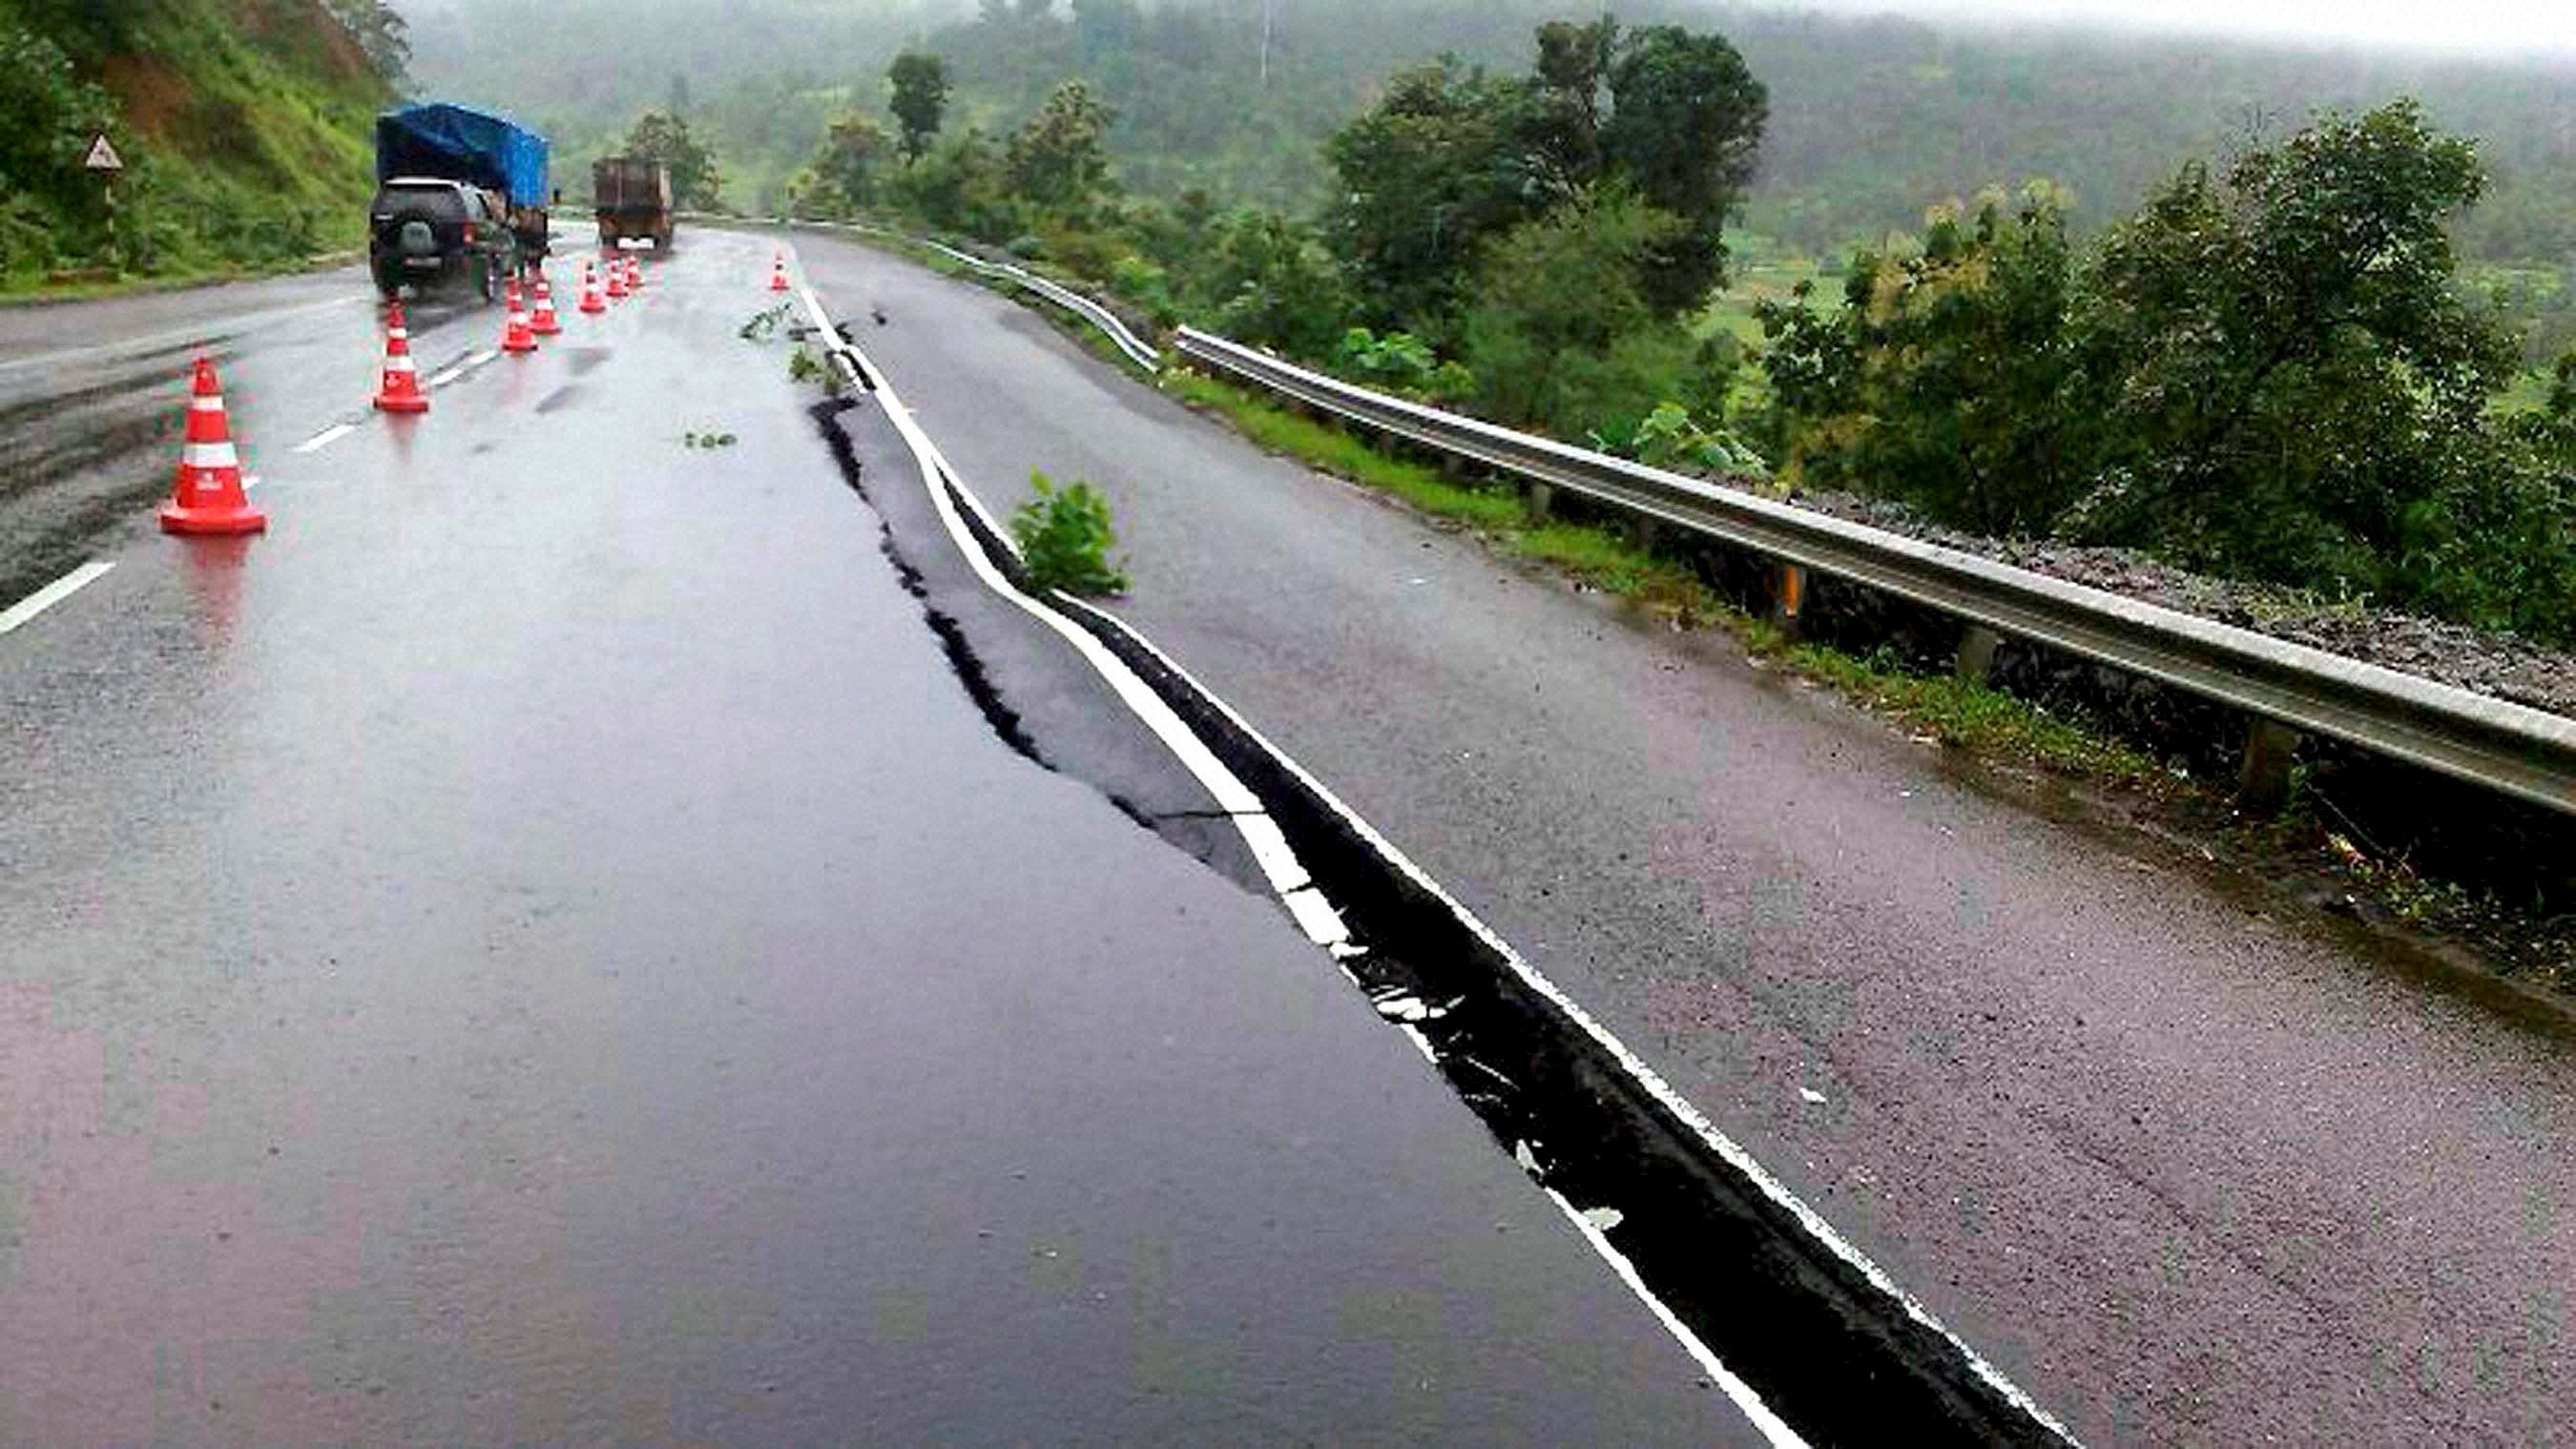 Igatpuri : A crack seen on the highway caused by the erosion due to heavy rains at Kasara Ghat near Igatpuri, Maharashtra on Thursday. PTI Photo